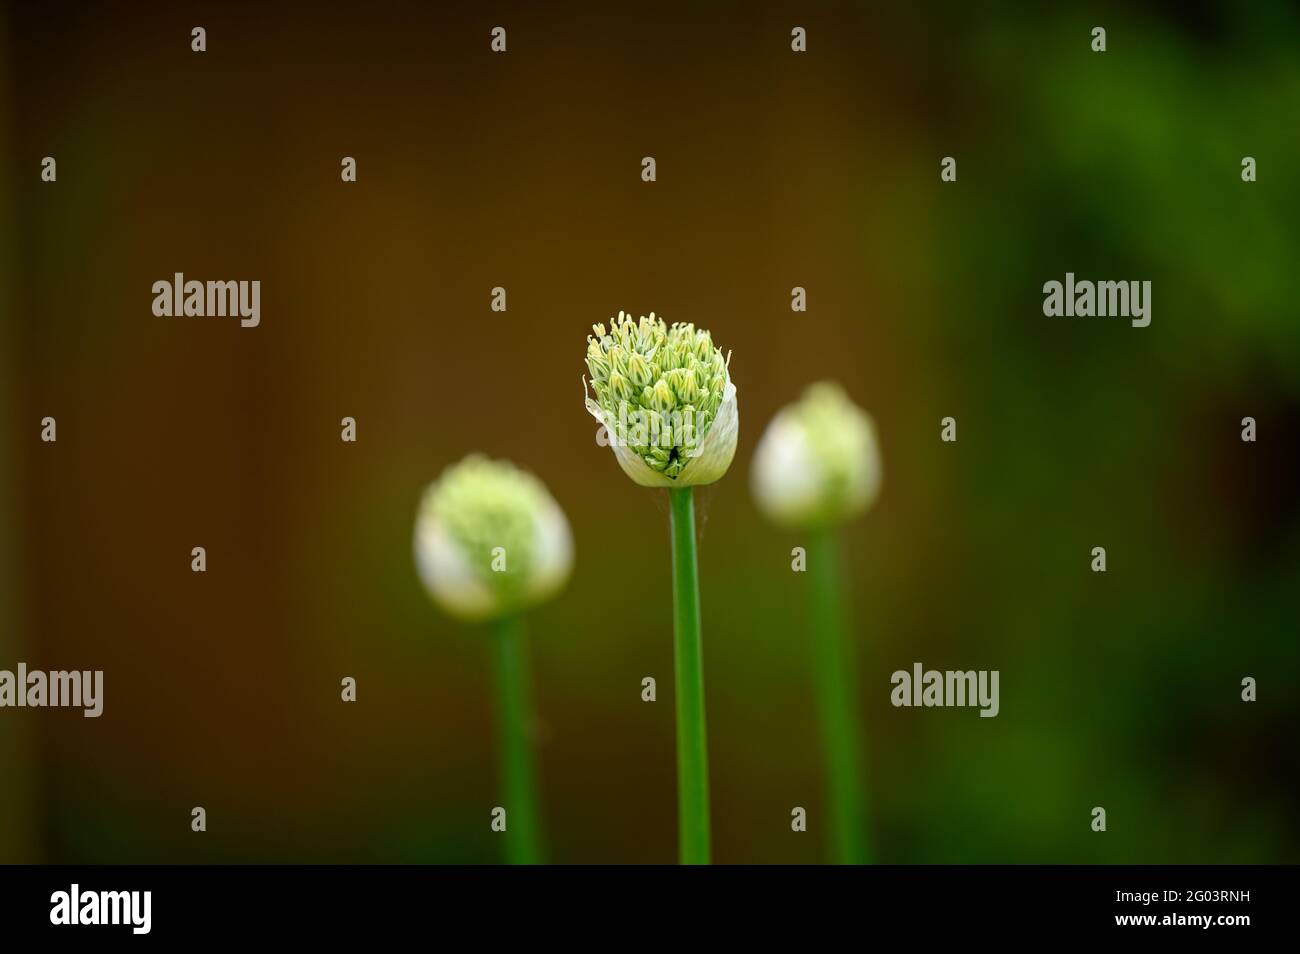 Three alliums in a garden with an out of focus background Stock Photo